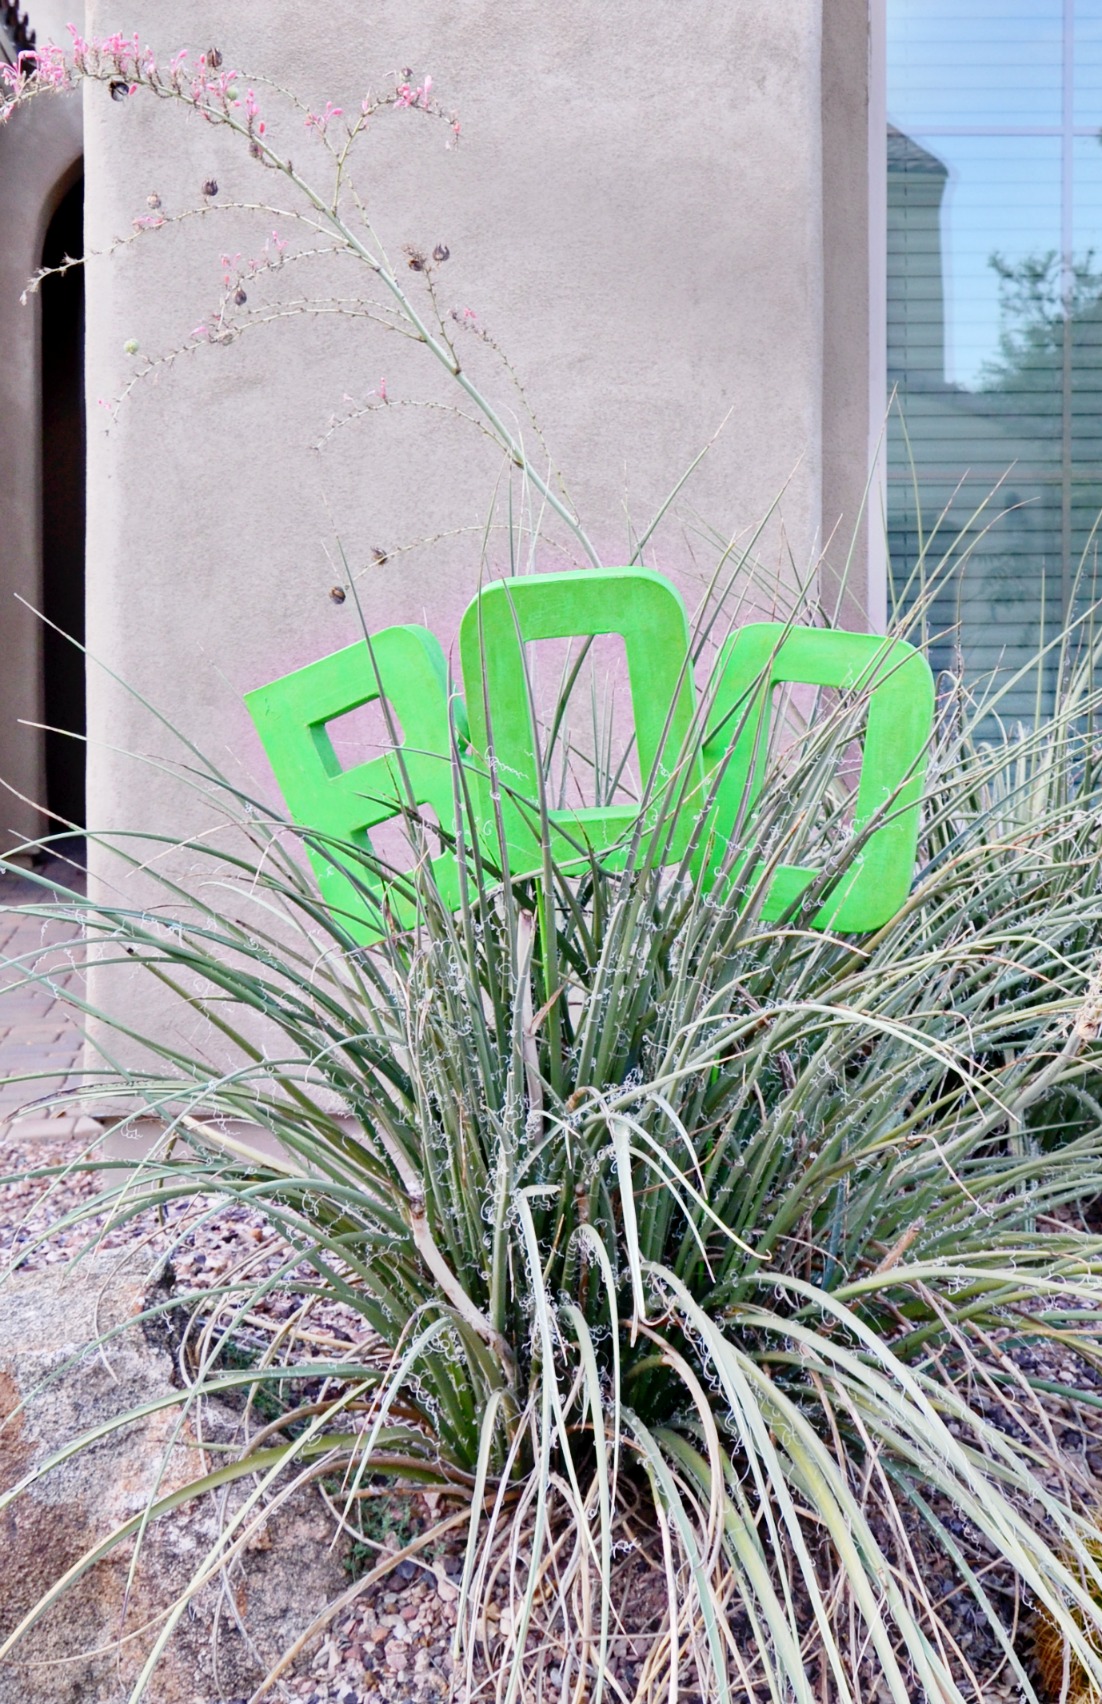 Make an easy Glow in the Dark BOO Yard Decoration with paper mache letters and glow in the dark paint to add some fun to your October yard.